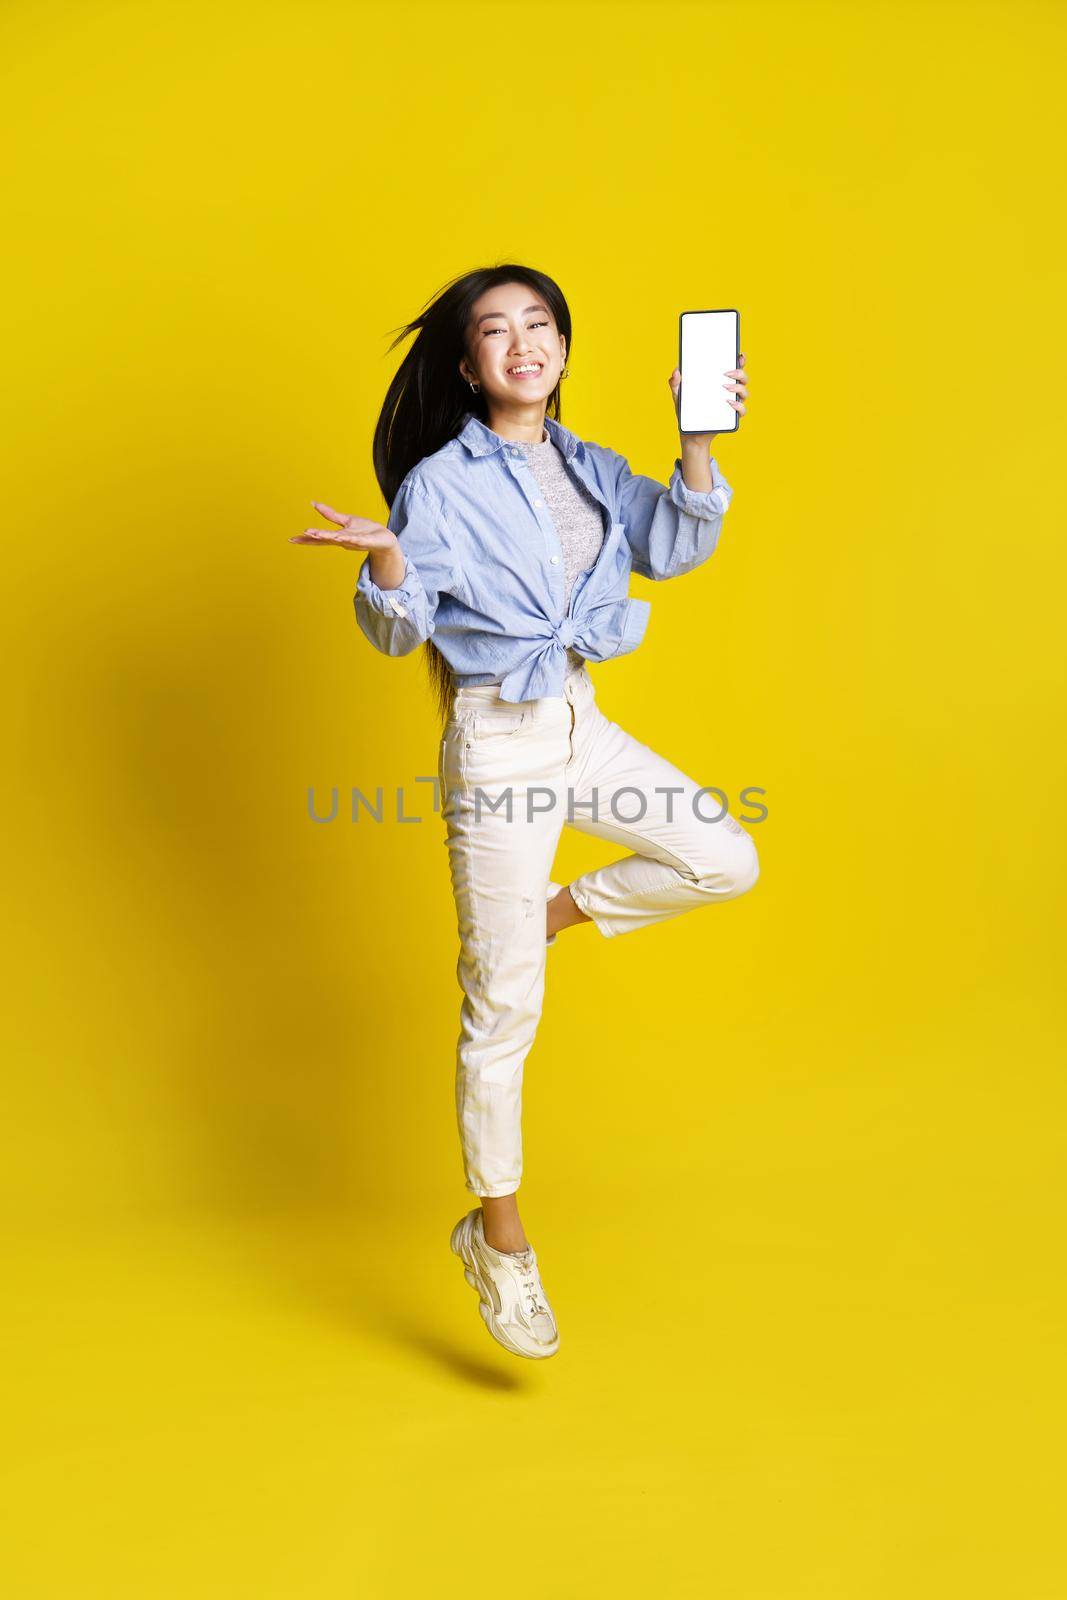 Happy asian girl jumping holding smartphone showing white screen mobile app advertisement isolated on yellow background. Full length portrait of joyful asian girl. Product placement.